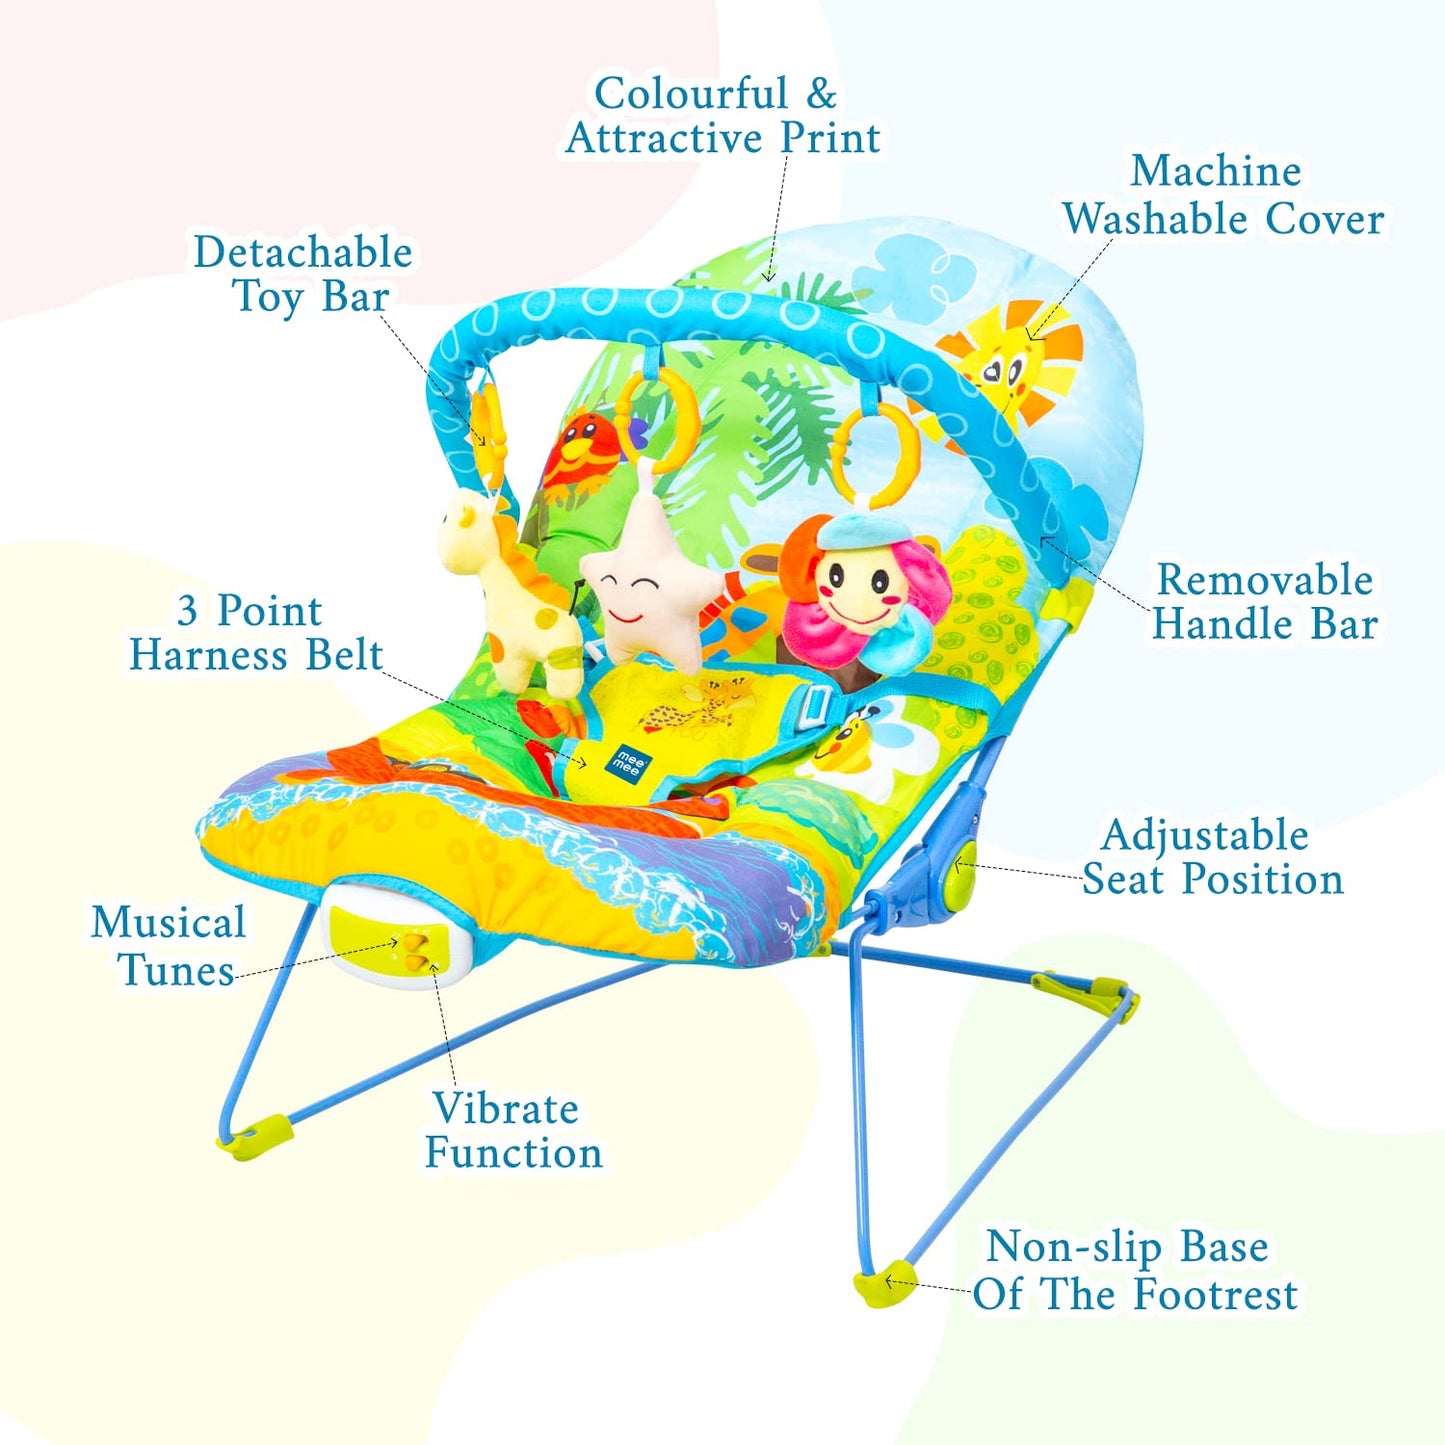 Mee Mee Vibrating & Soothing Baby Bouncer